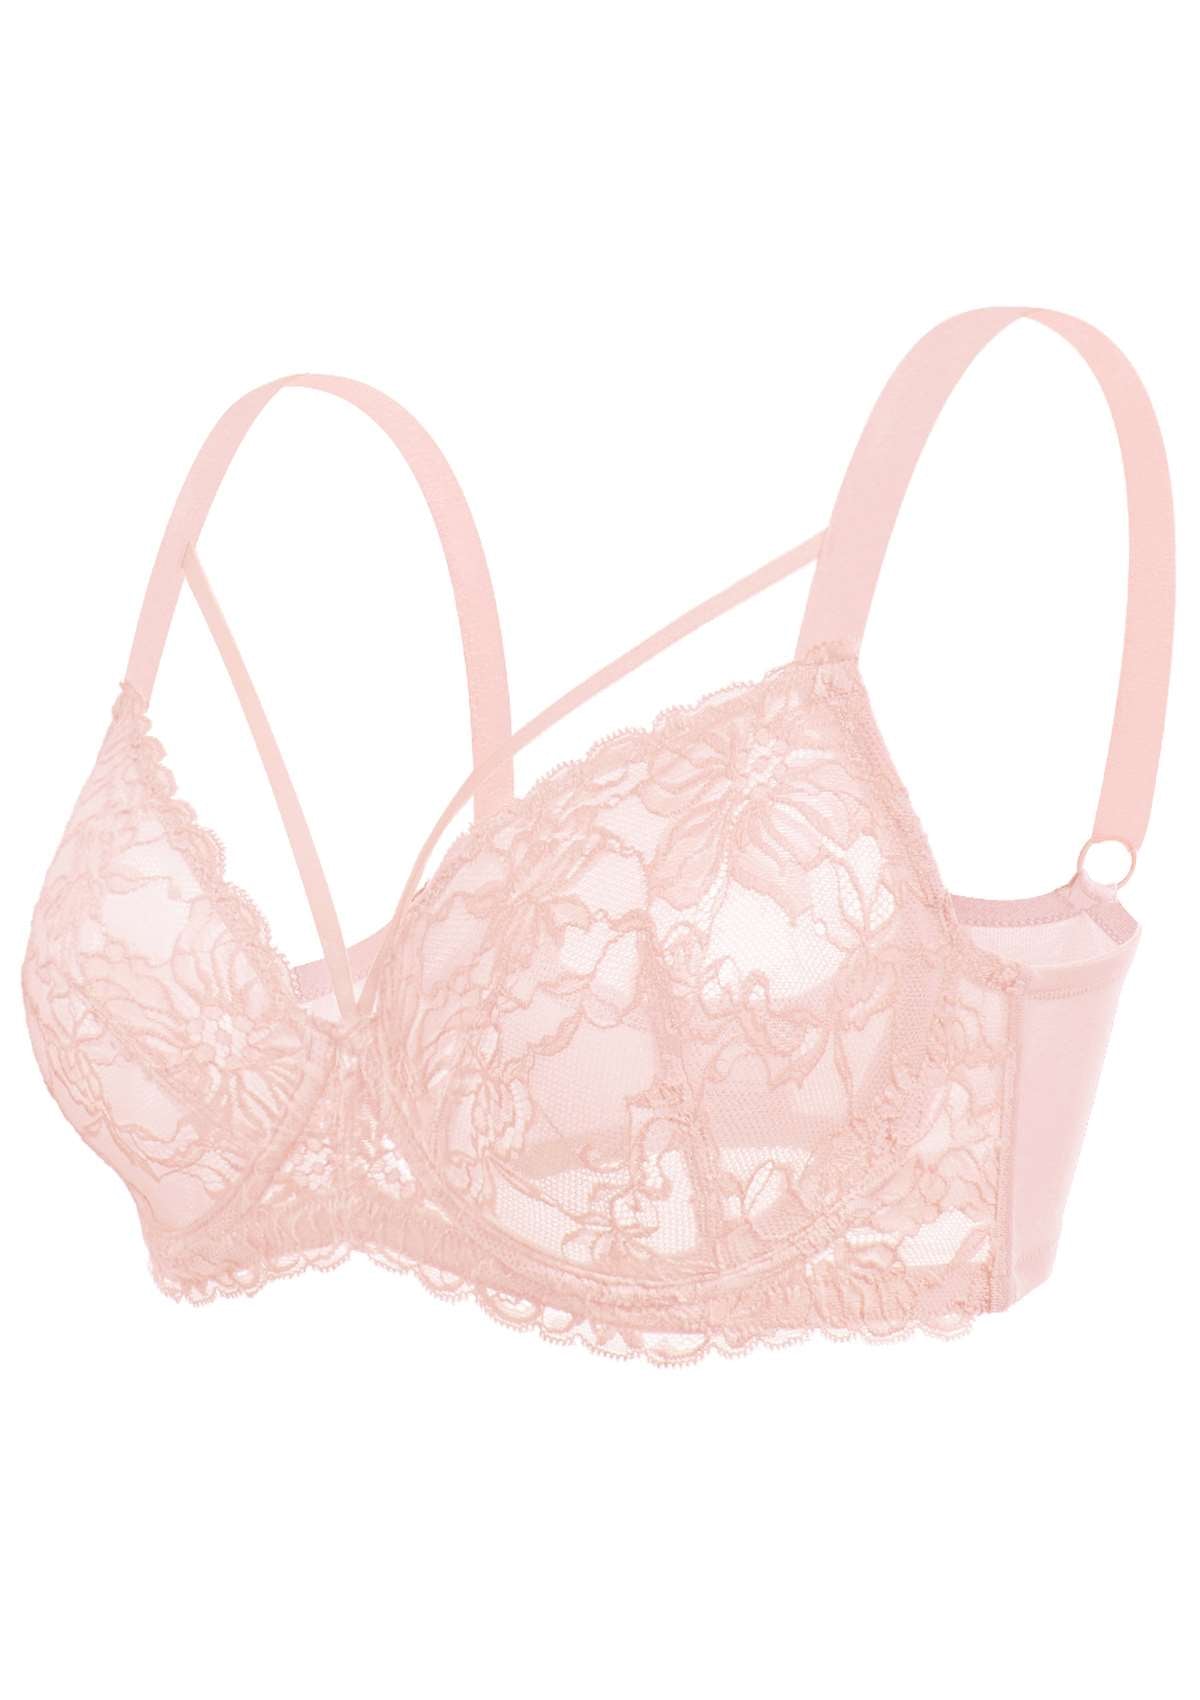 HSIA Pretty In Petals: Strappy Lace Sheer Bra For Side And Back Fat - Beige Cream / 44 / G